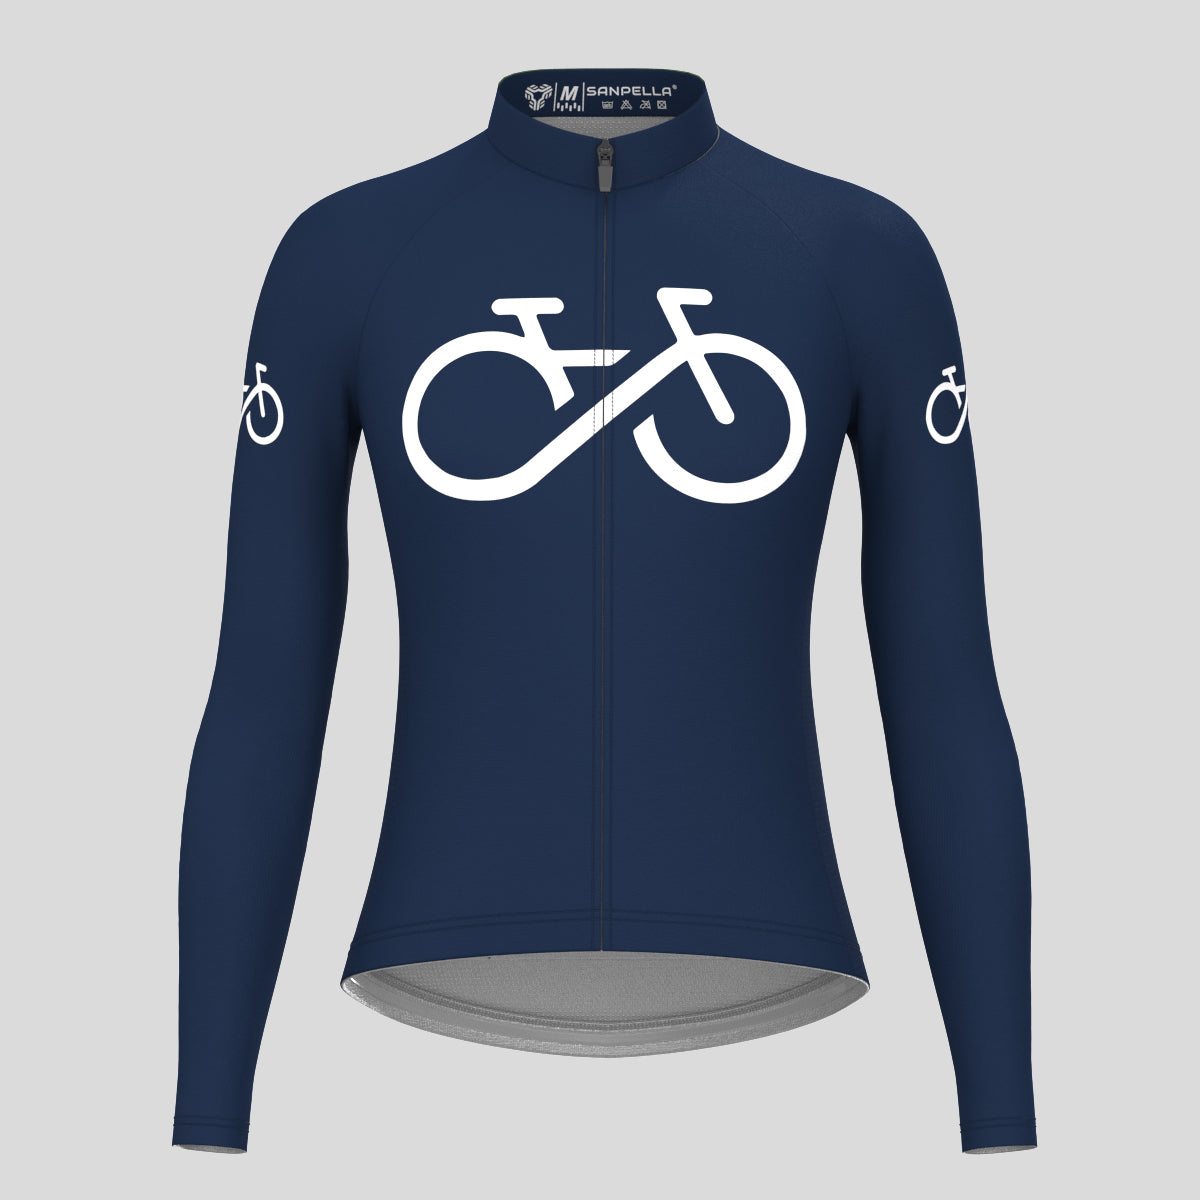 Bike Forever Women's LS Cycling Jersey - Navy